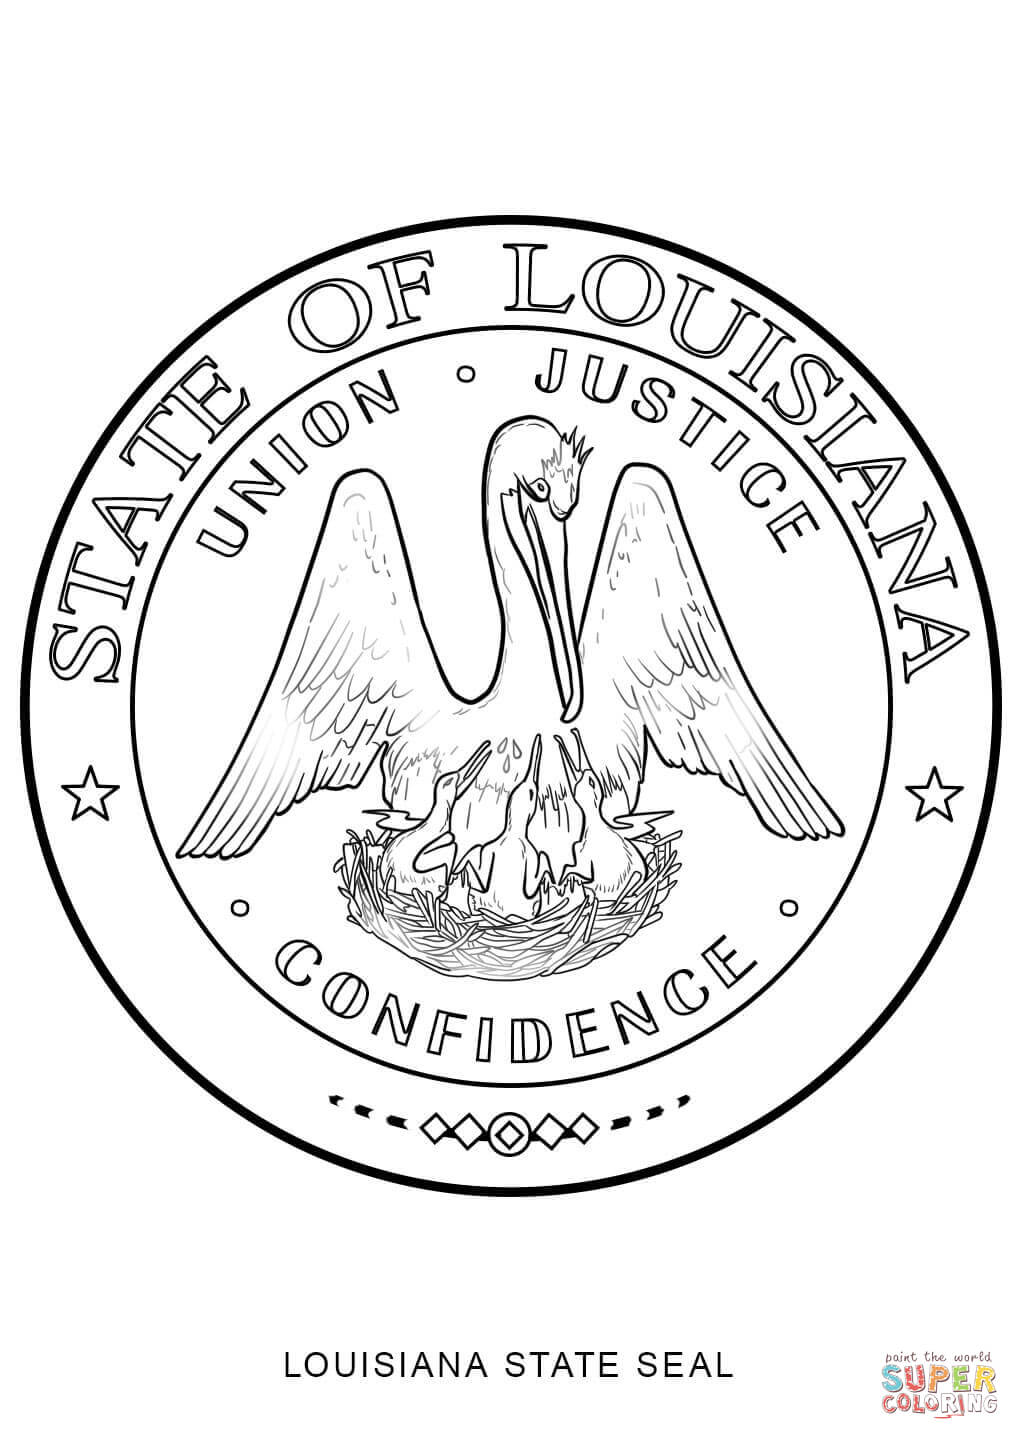 Louisiana State Seal coloring page | Free Printable Coloring Pages